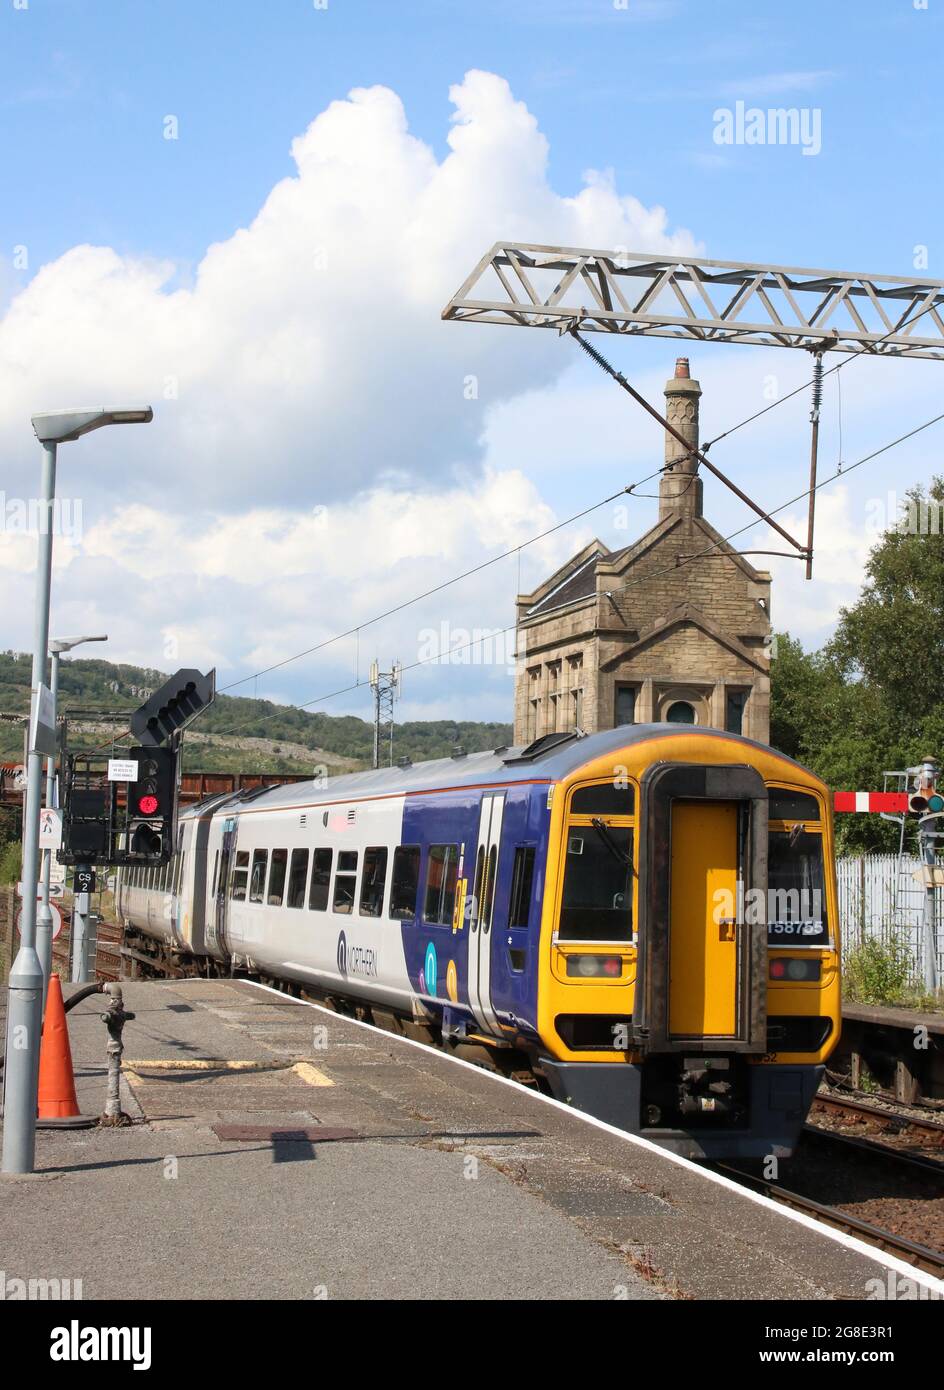 Northern three car class 158 express sprinter dmu, number 158 755, leaving Carnforth railway station on Monday 19th July 2021 with passenger train. Stock Photo